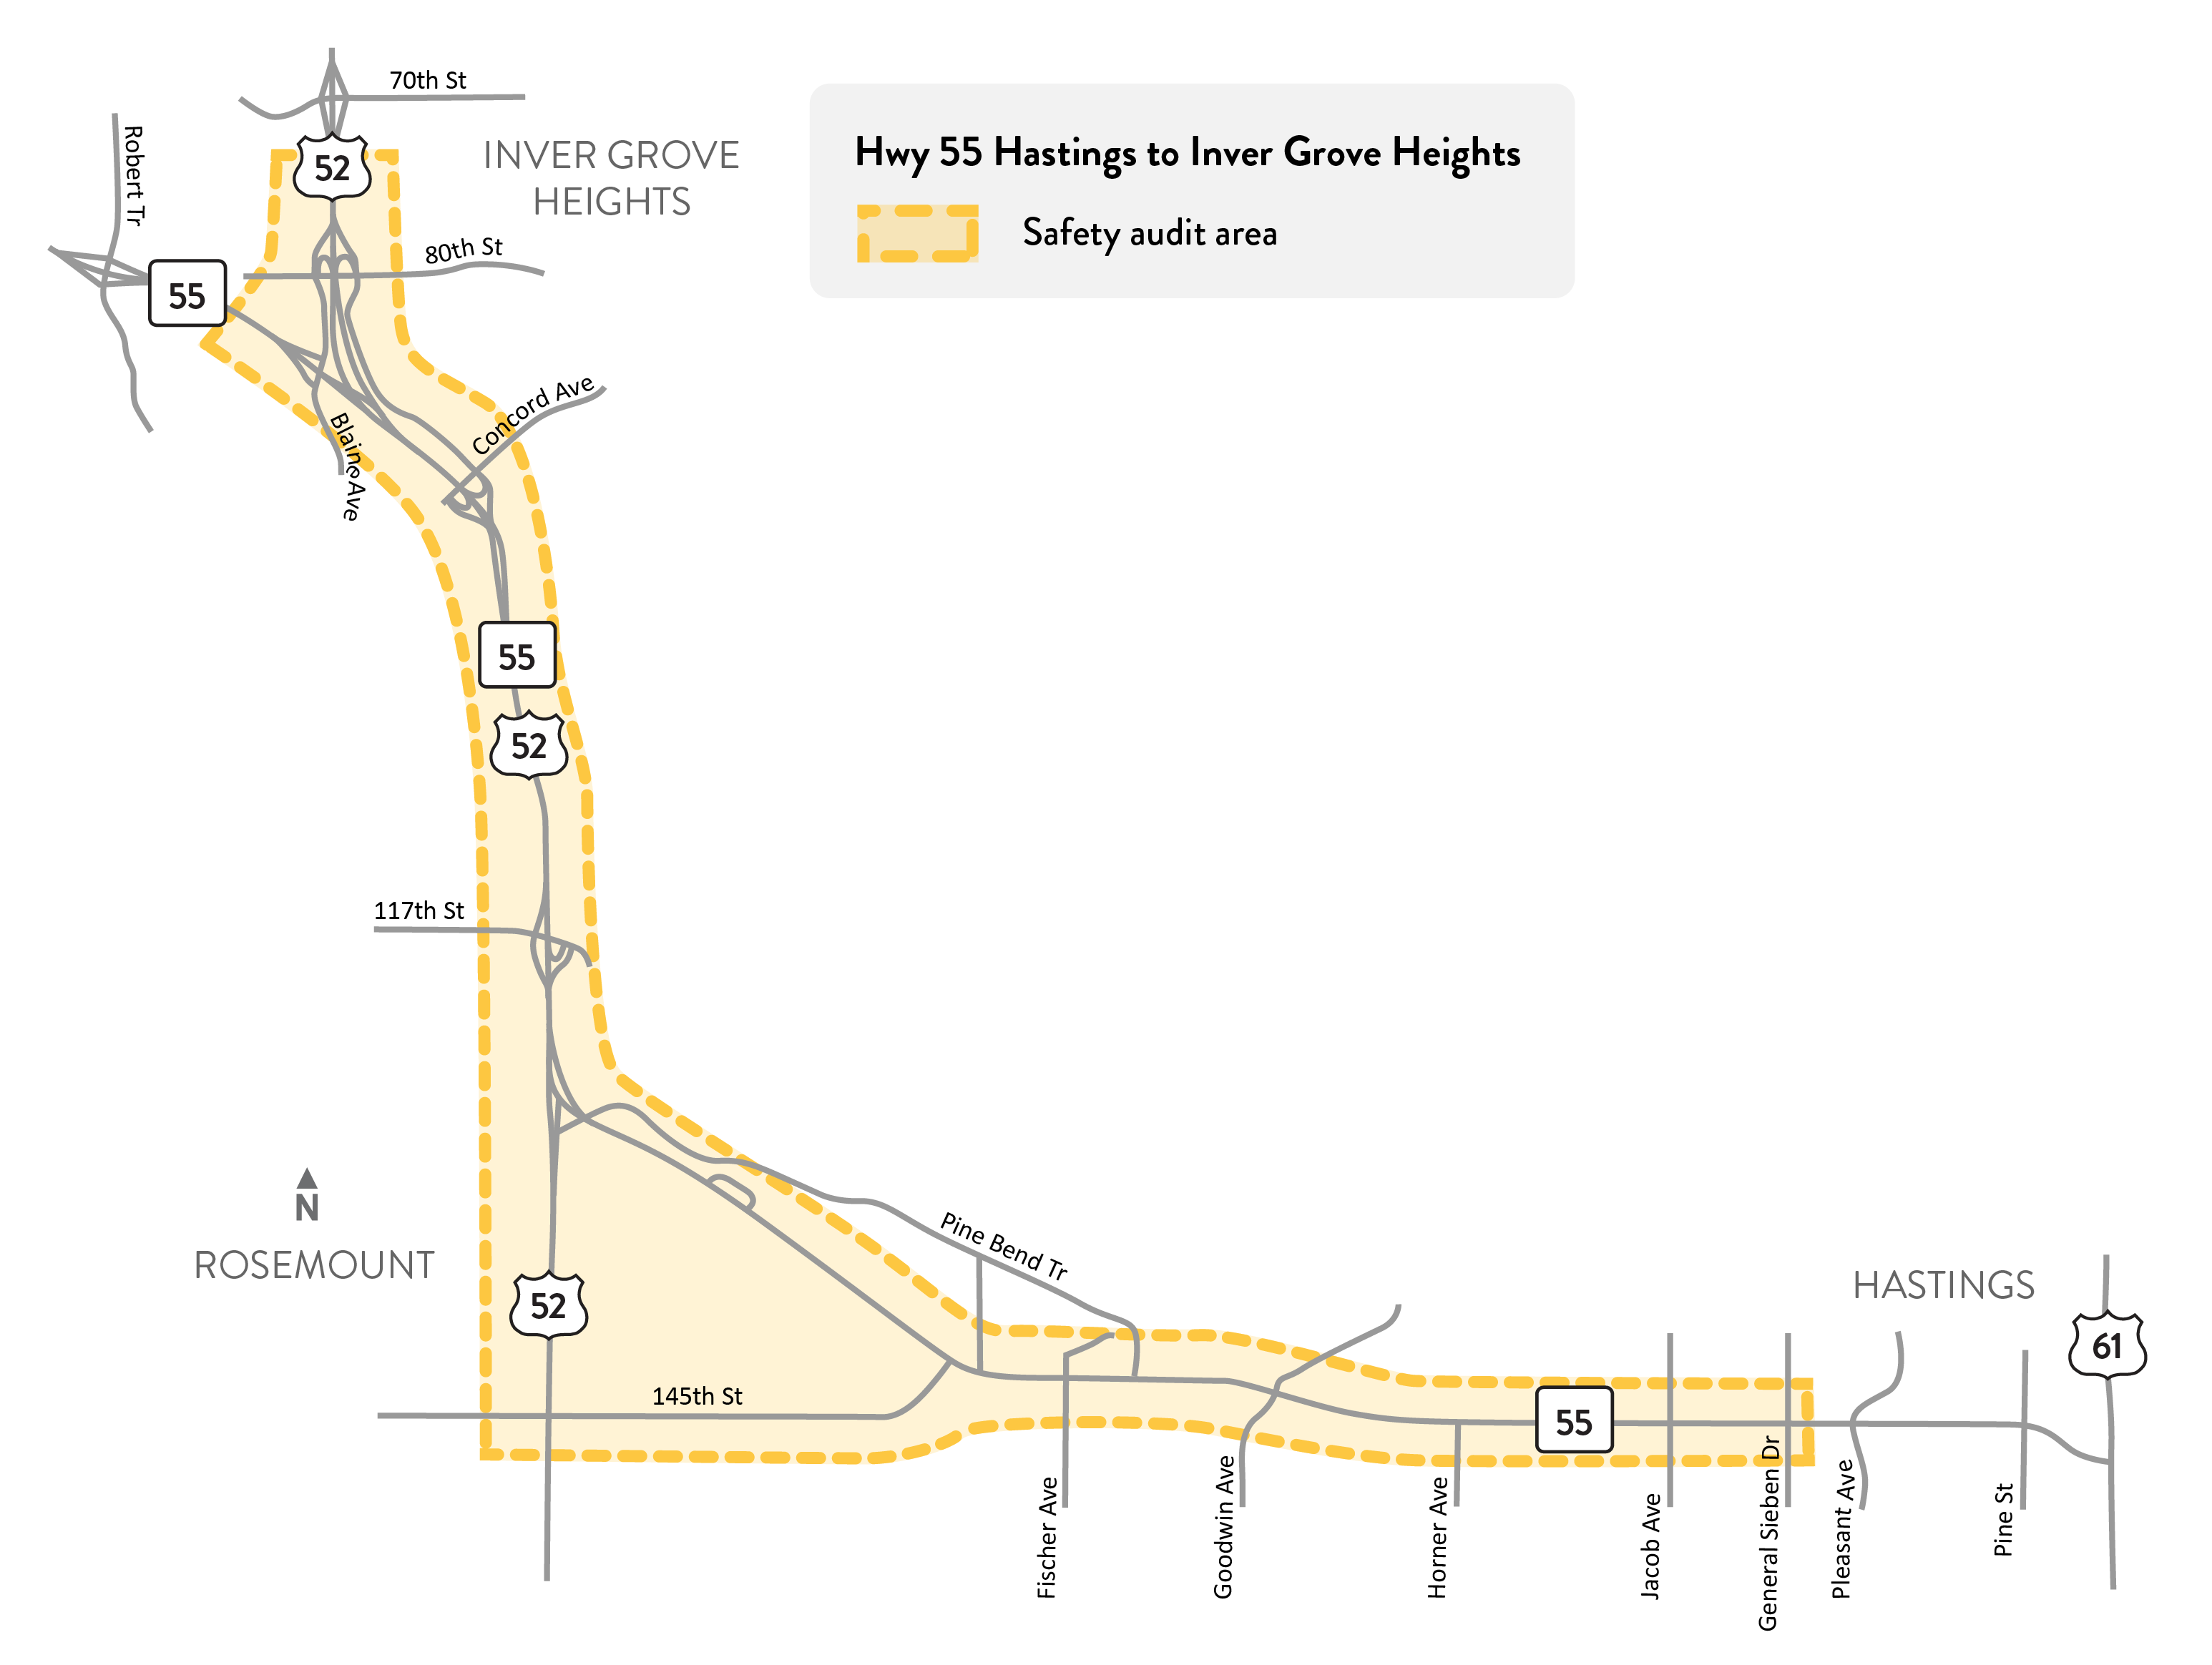 Hwy 55 Hastings to Inver Grove Heights study location map